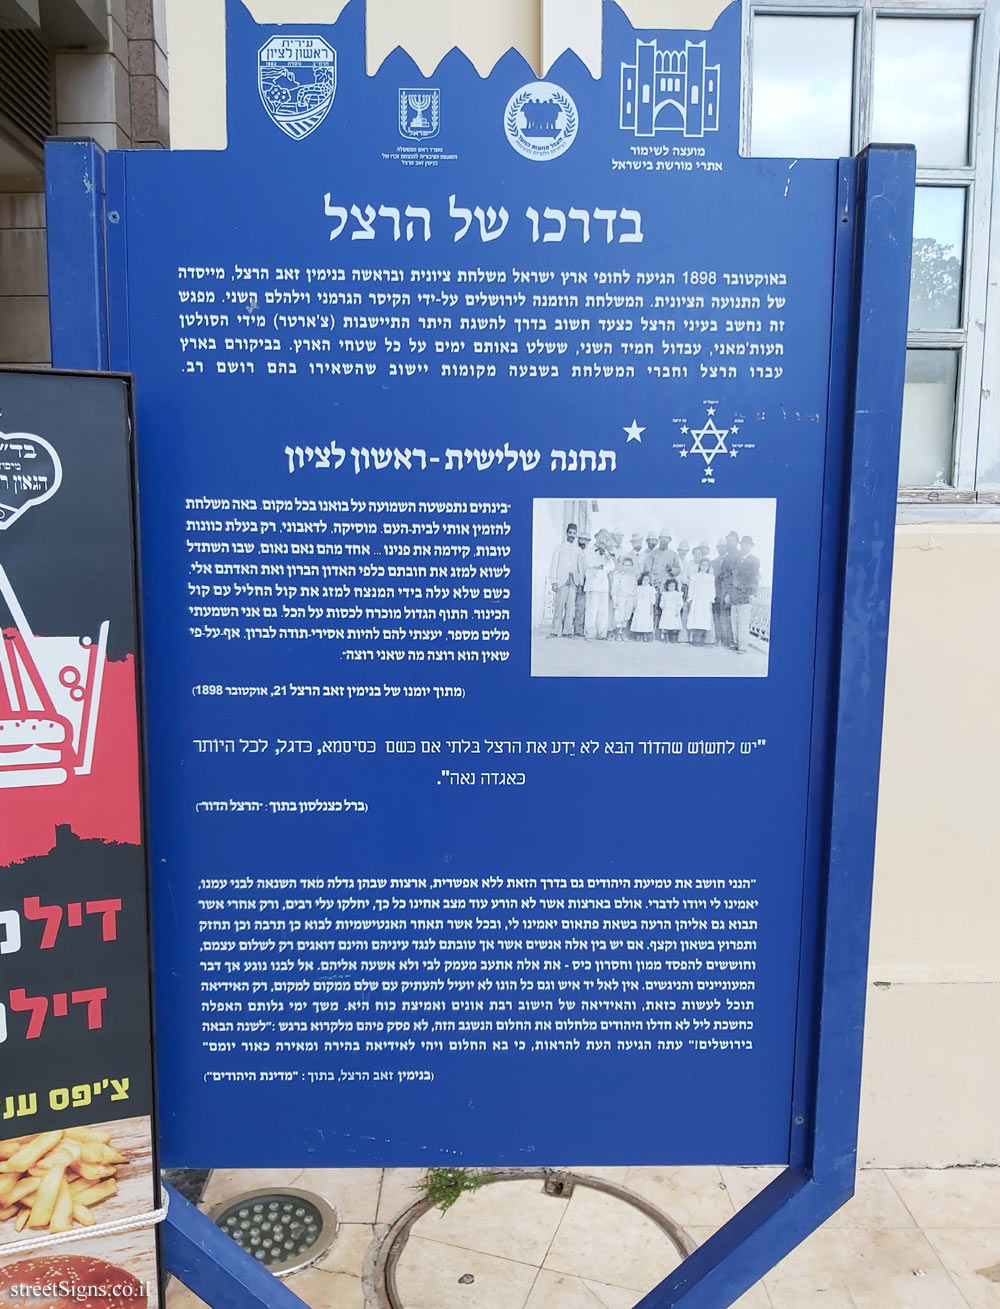 Rishon LeZion - Heritage Sites in Israel - In Herzl’s Way - 3rd Station